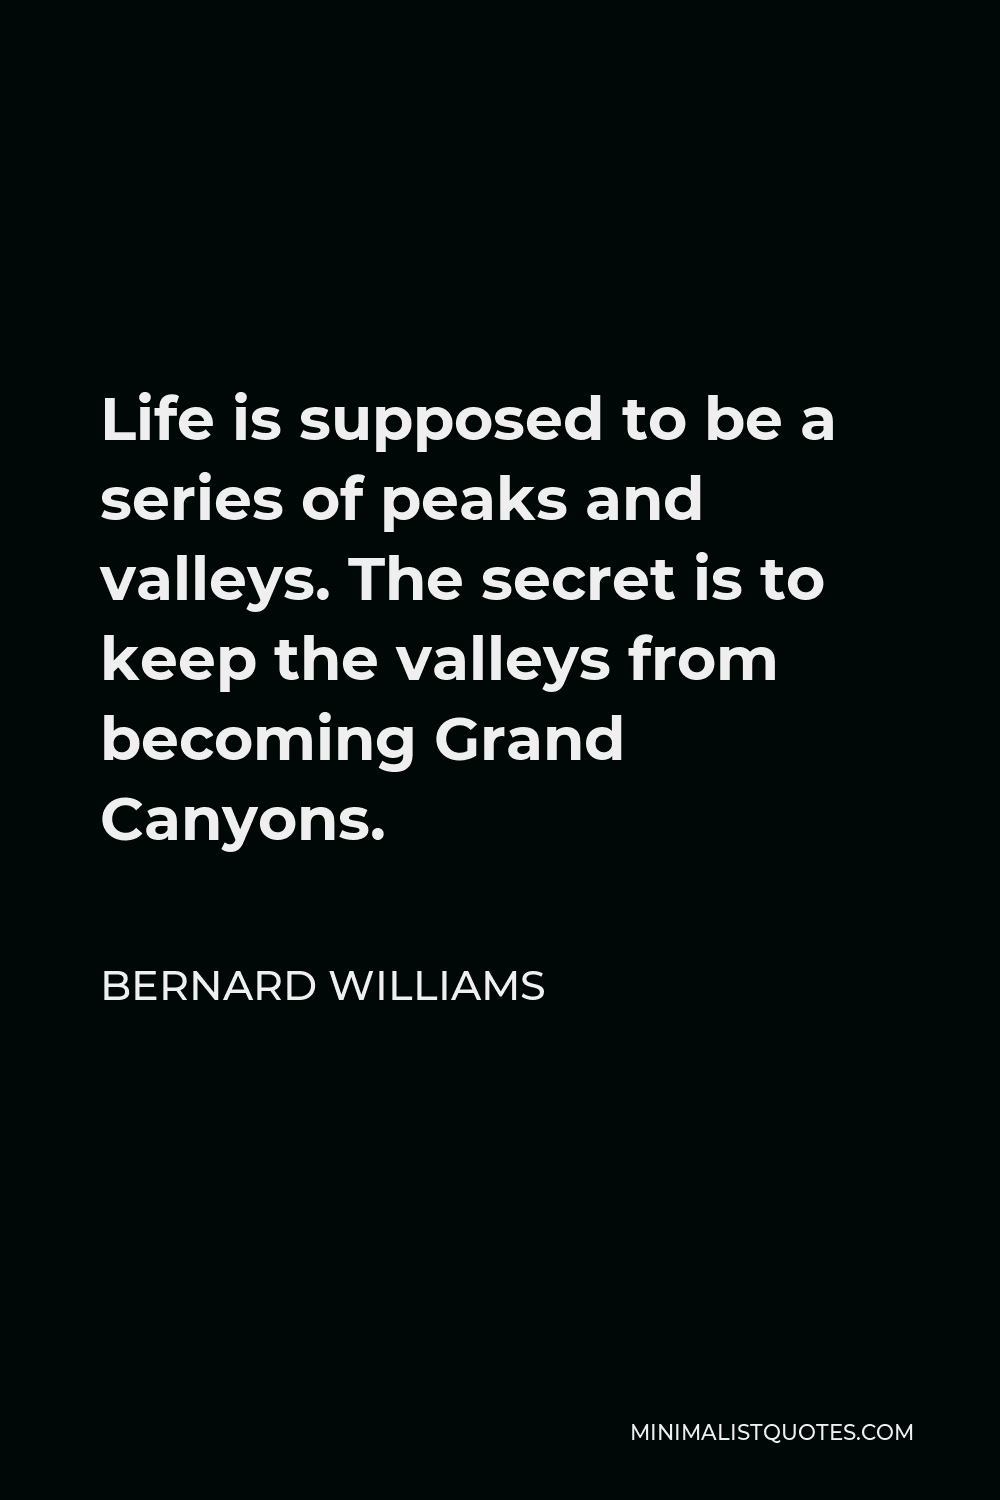 Bernard Williams Quote - Life is supposed to be a series of peaks and valleys. The secret is to keep the valleys from becoming Grand Canyons.